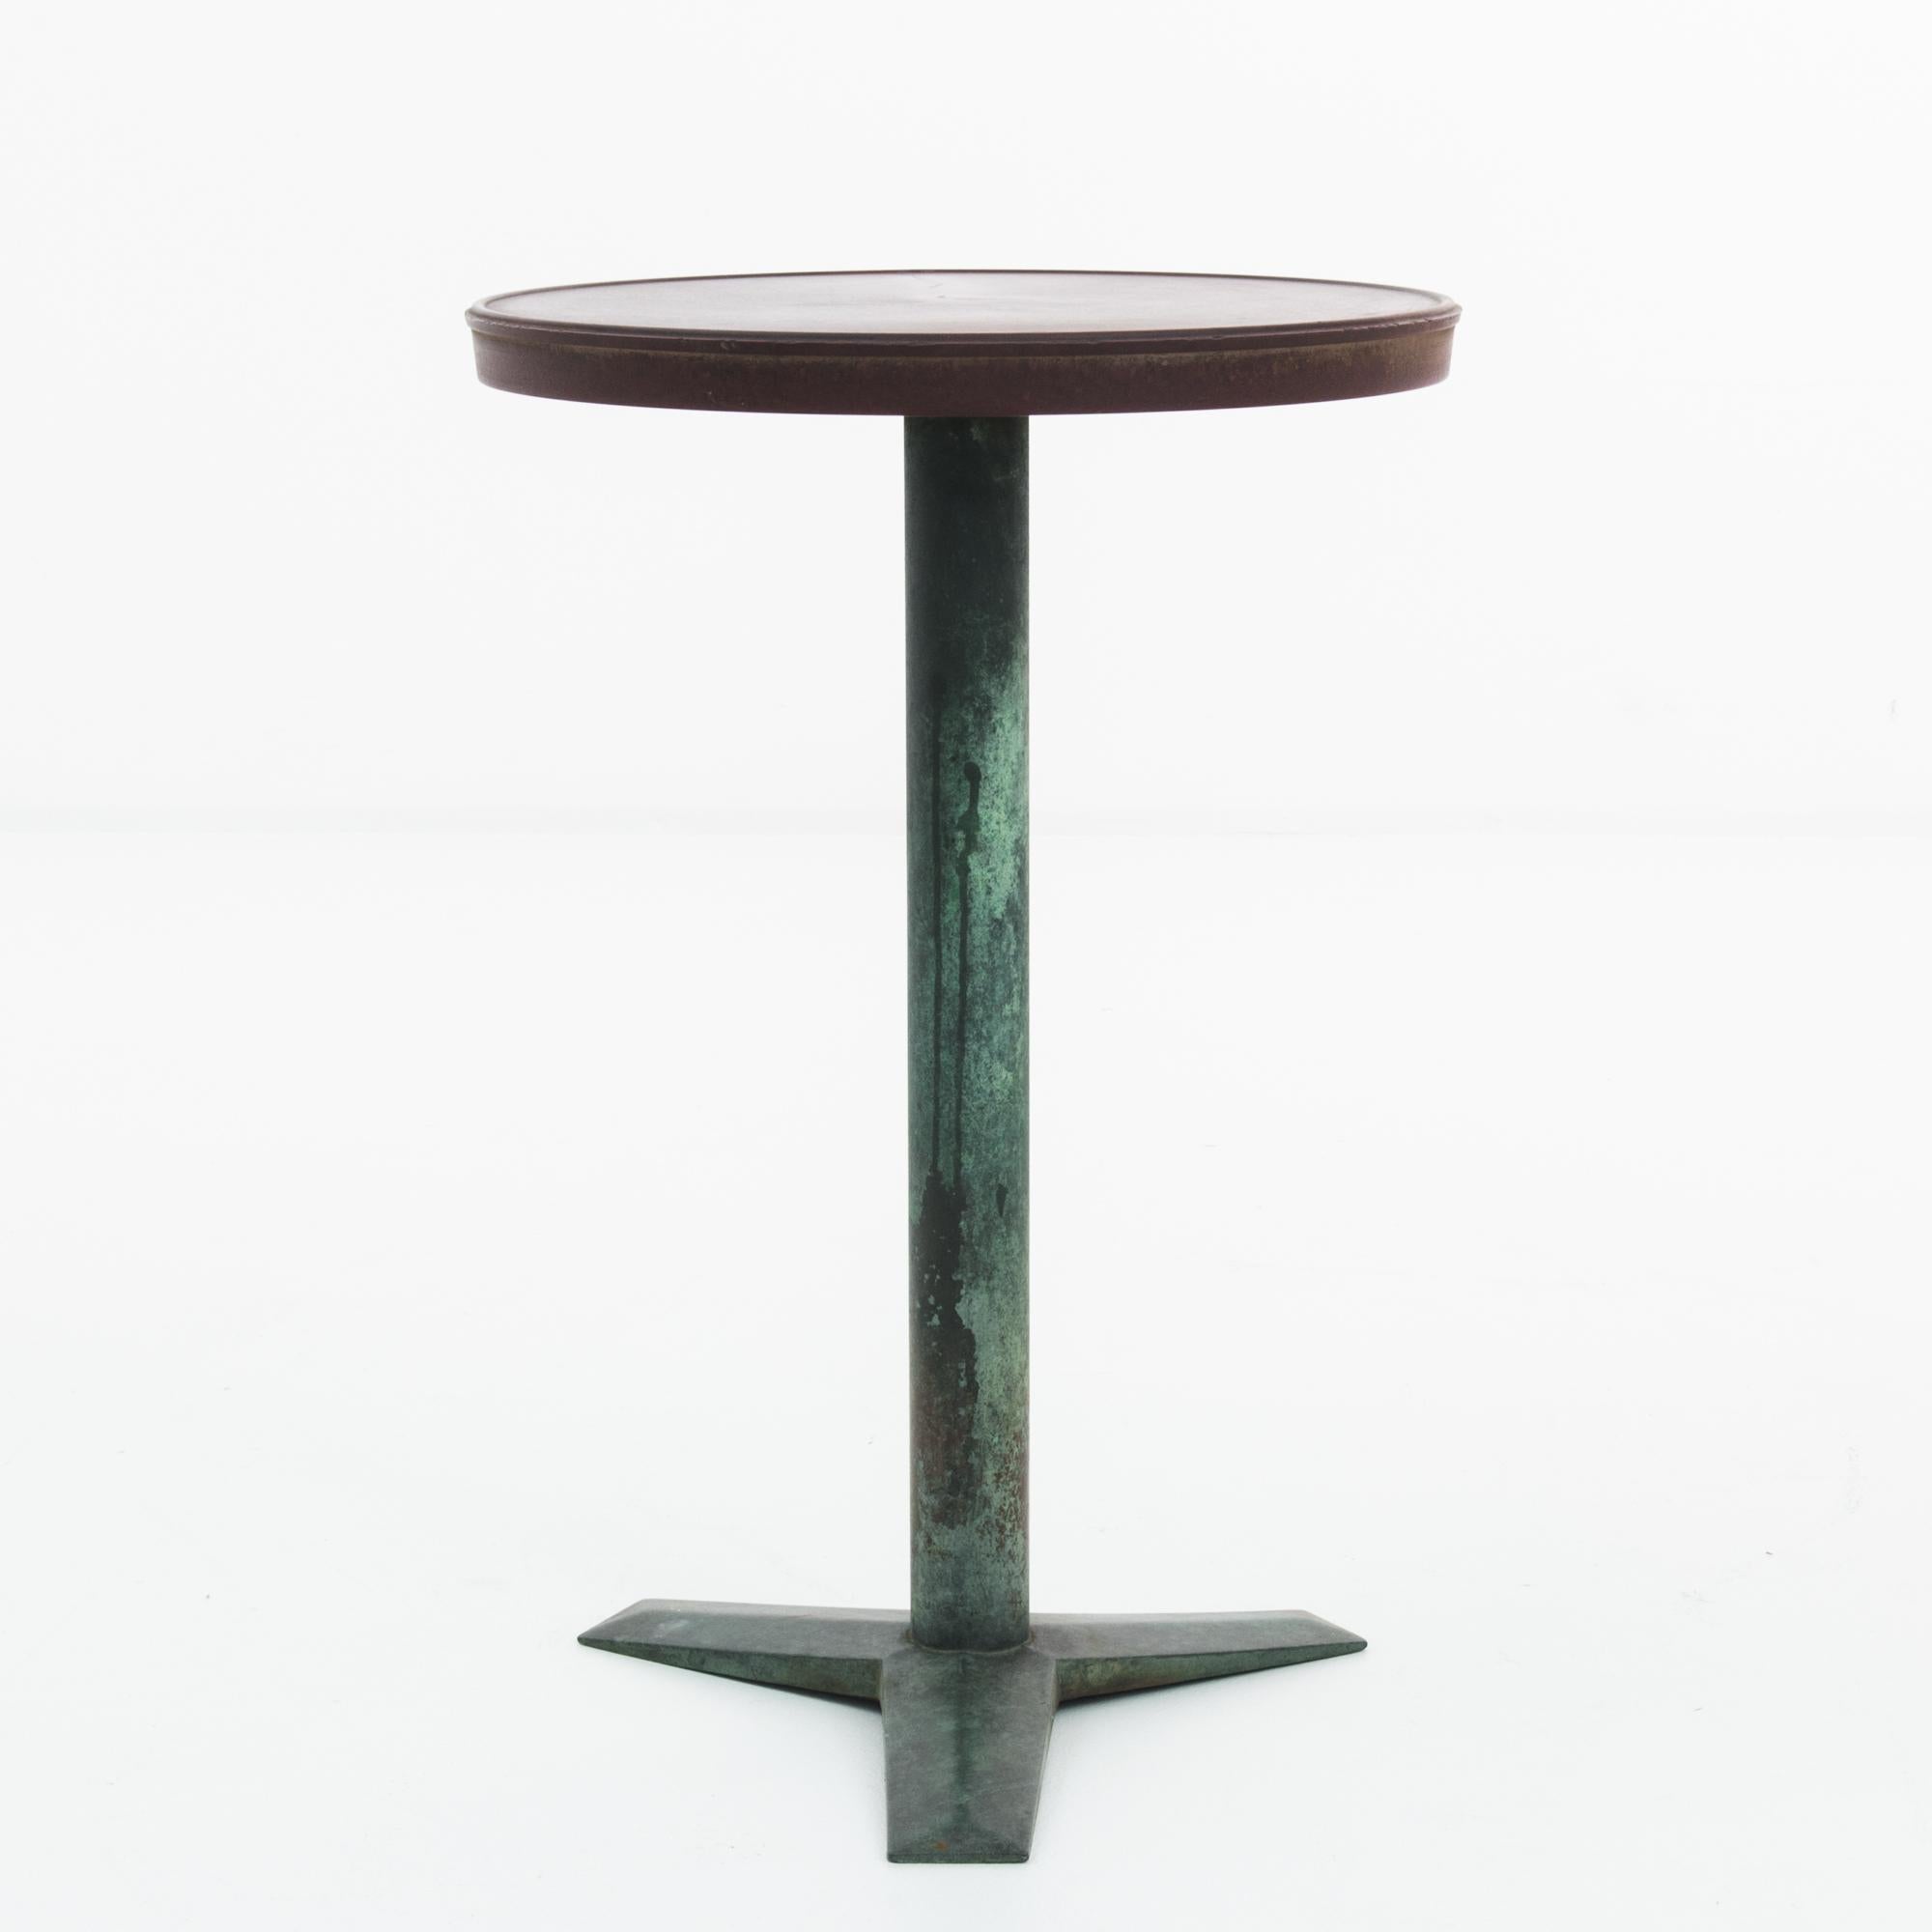 A brass side table from turn of the century France. The round tabletop sits atop a single column, creating a minimalist bistro silhouette. The burgundy tone of the tabletop makes a harmonious contrast with a beautiful verdigris copper patina,